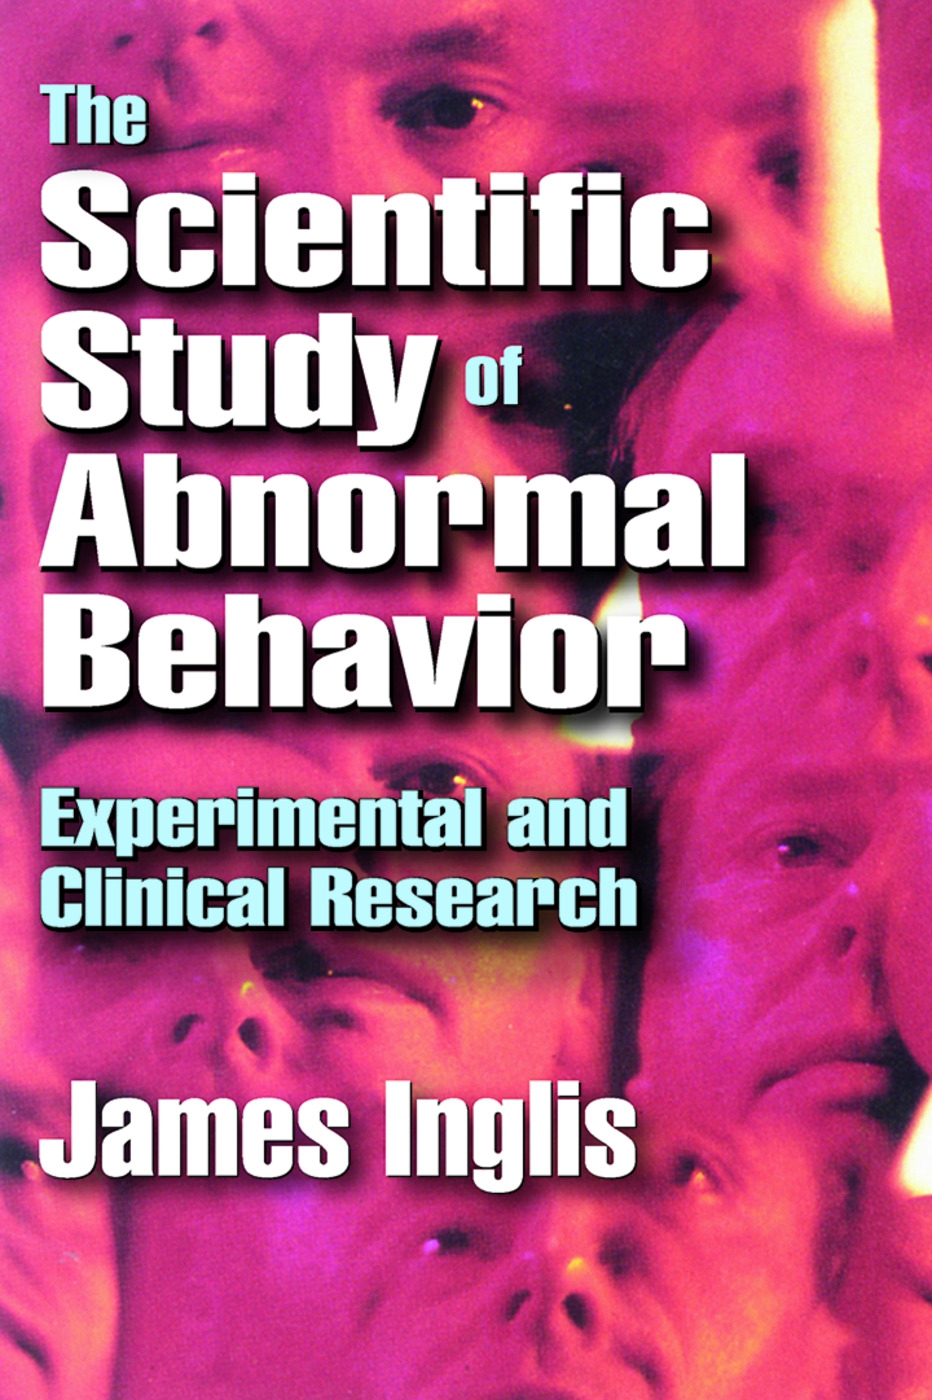 The Scientific Study of Abnormal Behavior: Experimental and Clinical Research